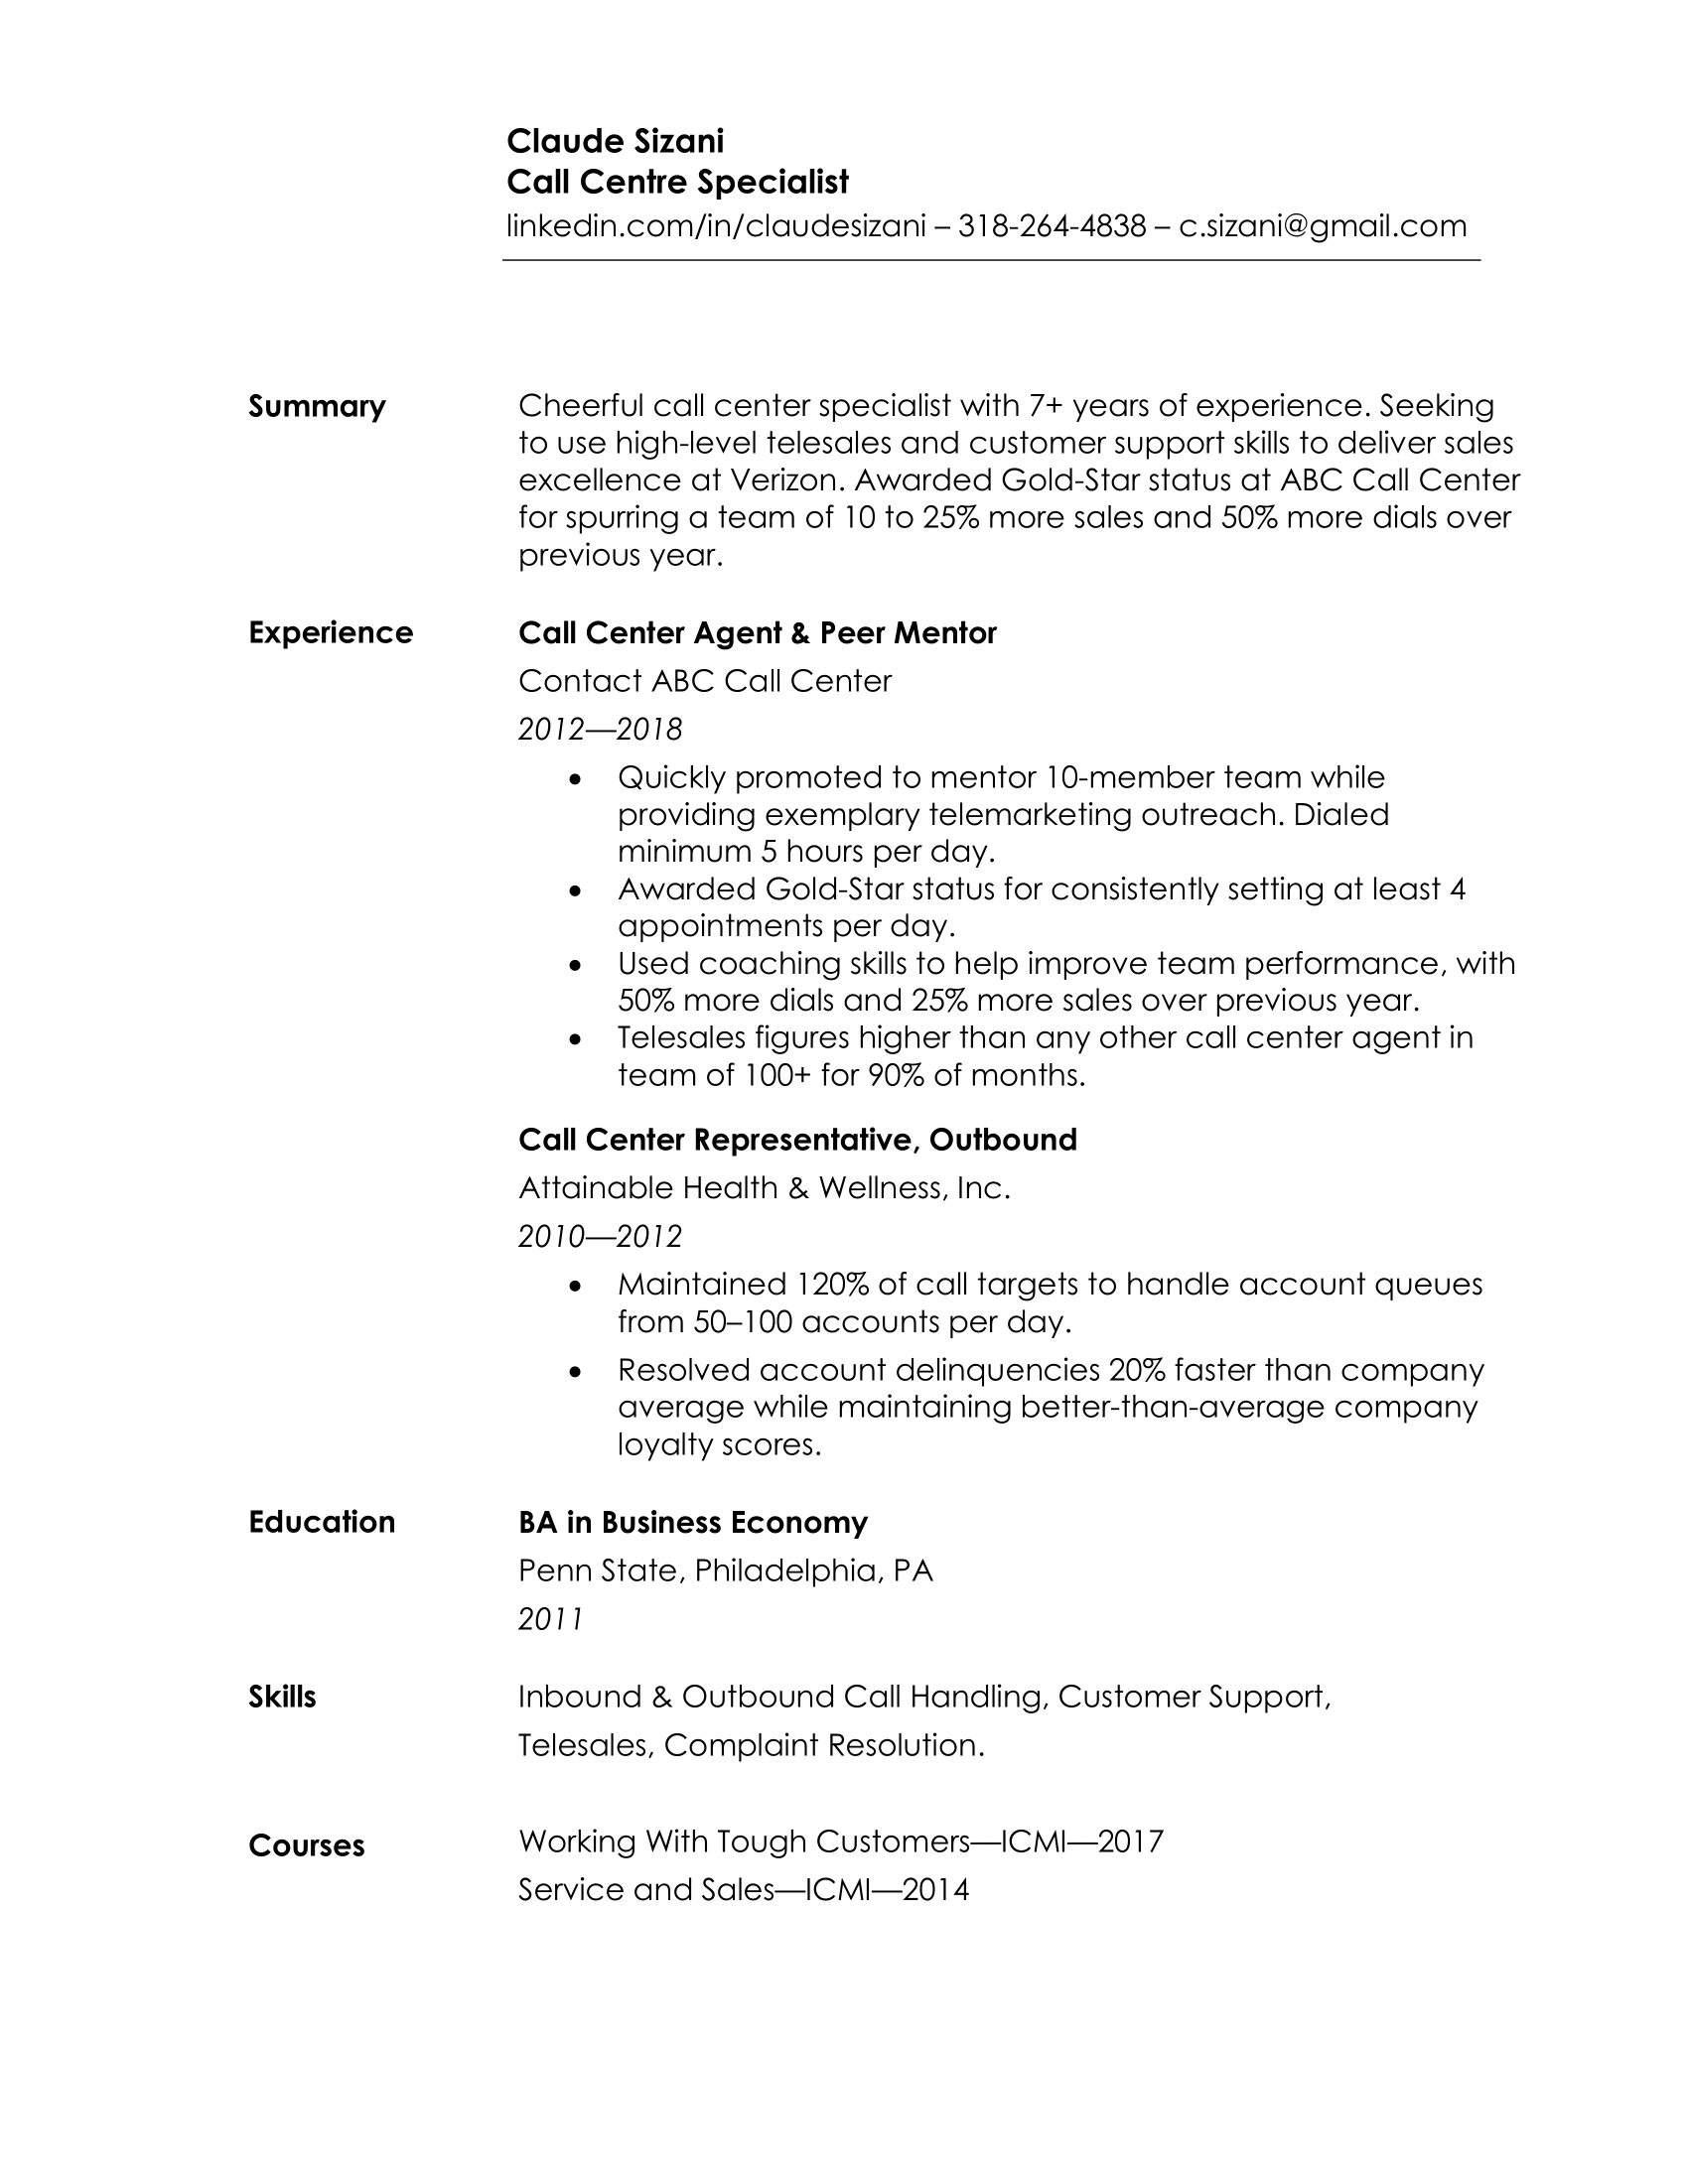 Additional coursework on resume your